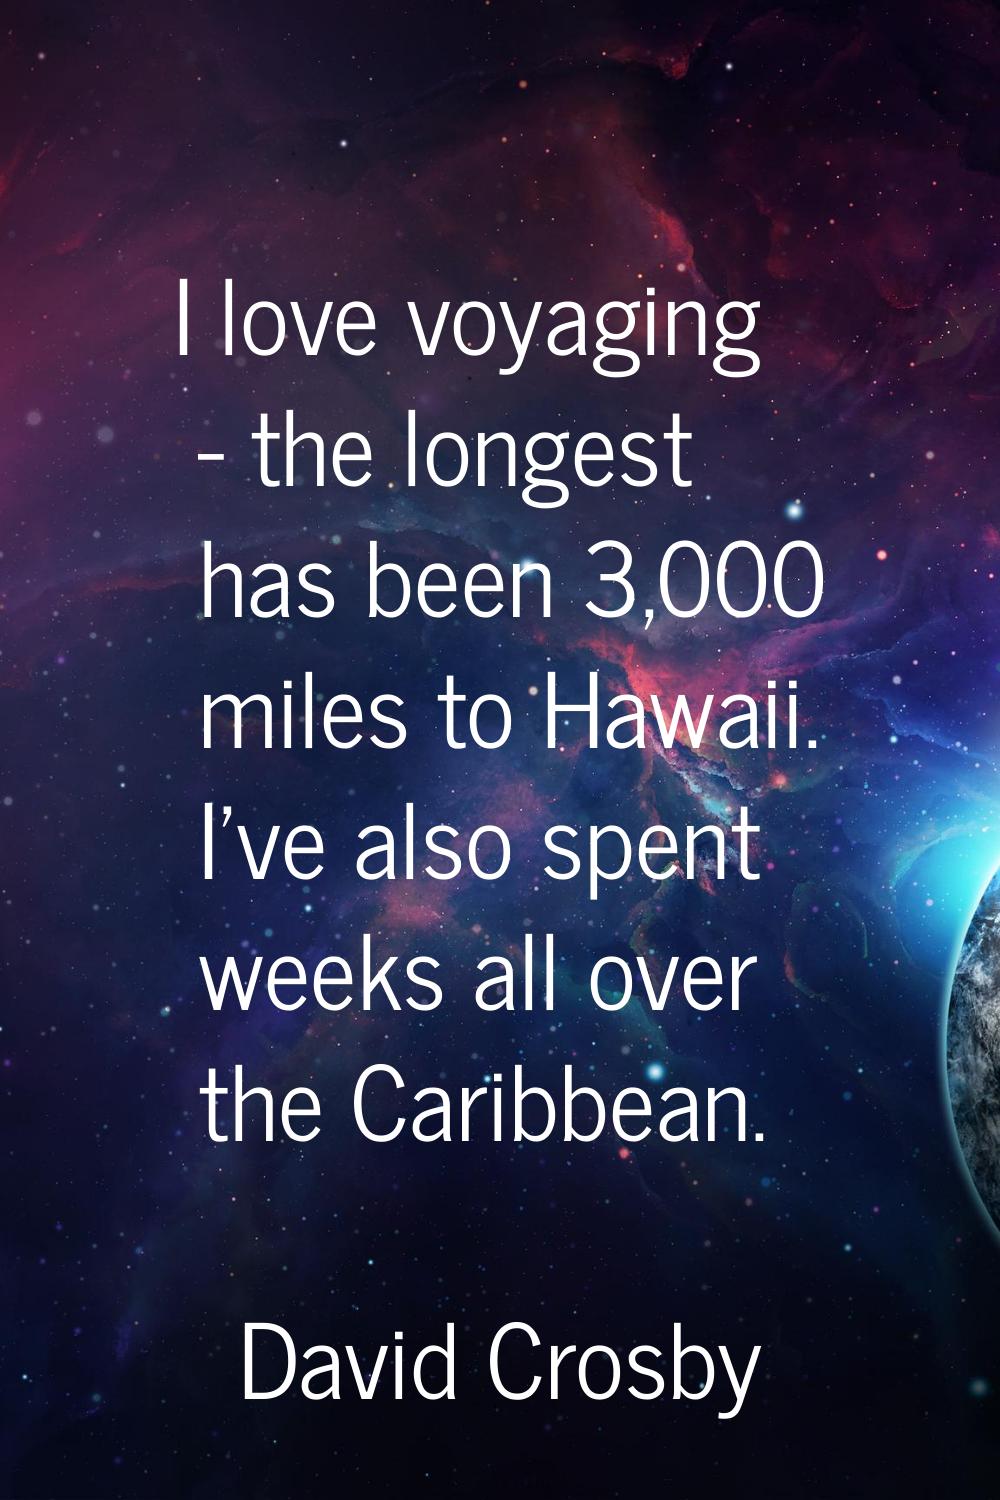 I love voyaging - the longest has been 3,000 miles to Hawaii. I've also spent weeks all over the Ca